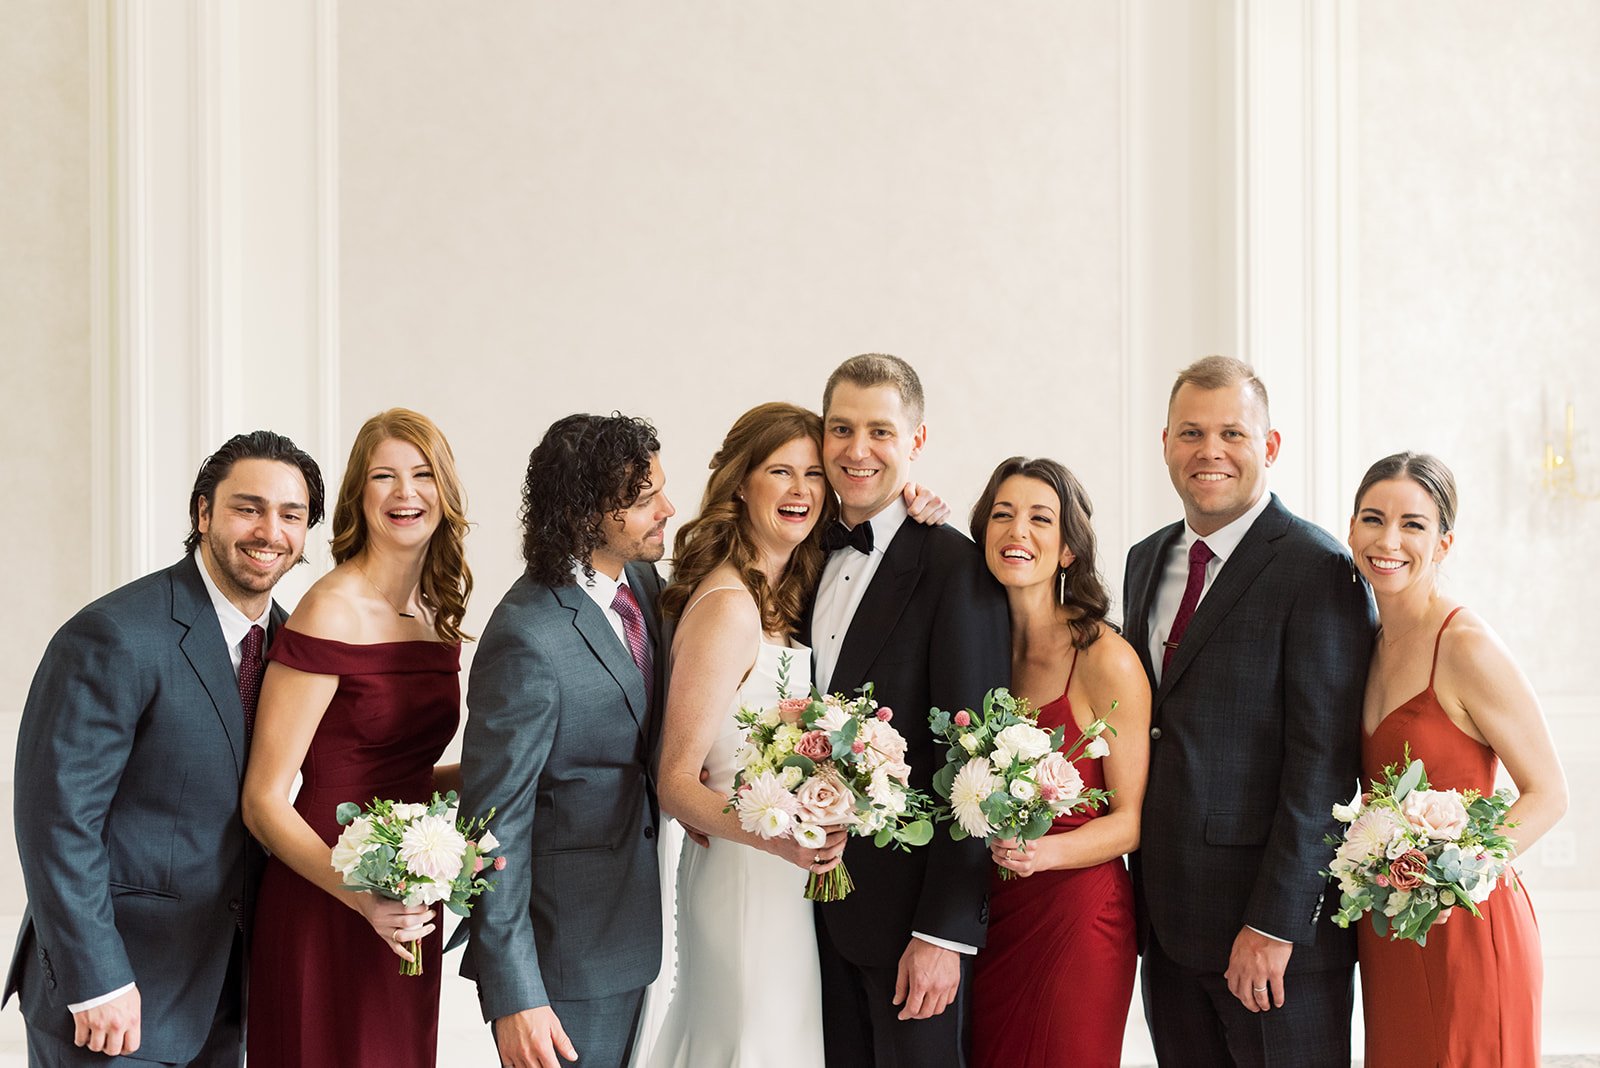 Bridal party photos at Lord Nelson Hotel in Halifax, NS